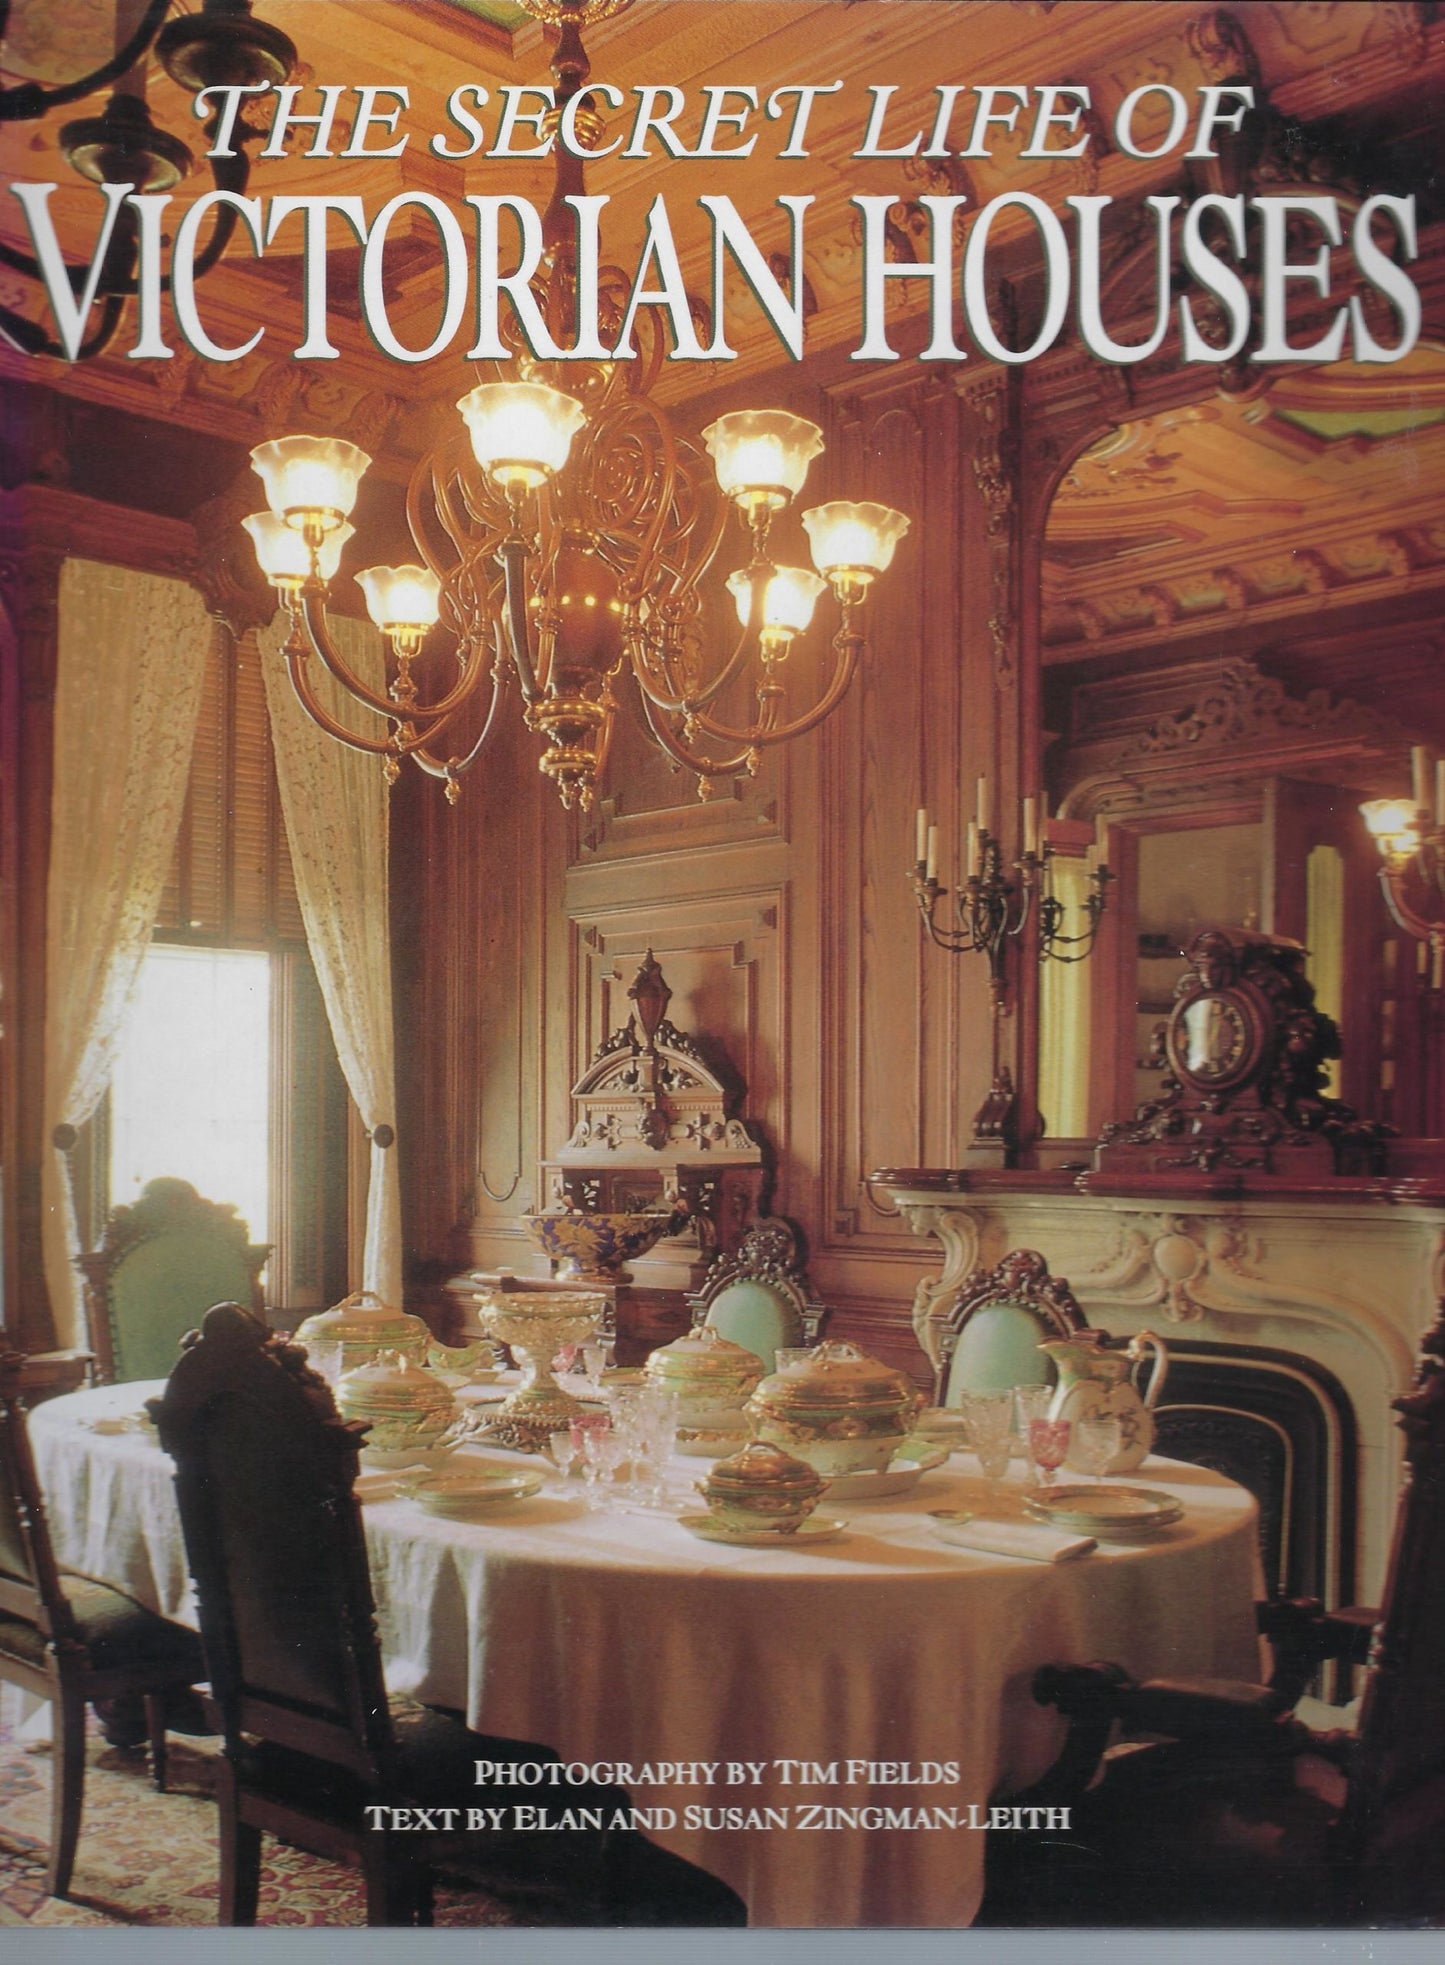 The secret life of Victorian houses